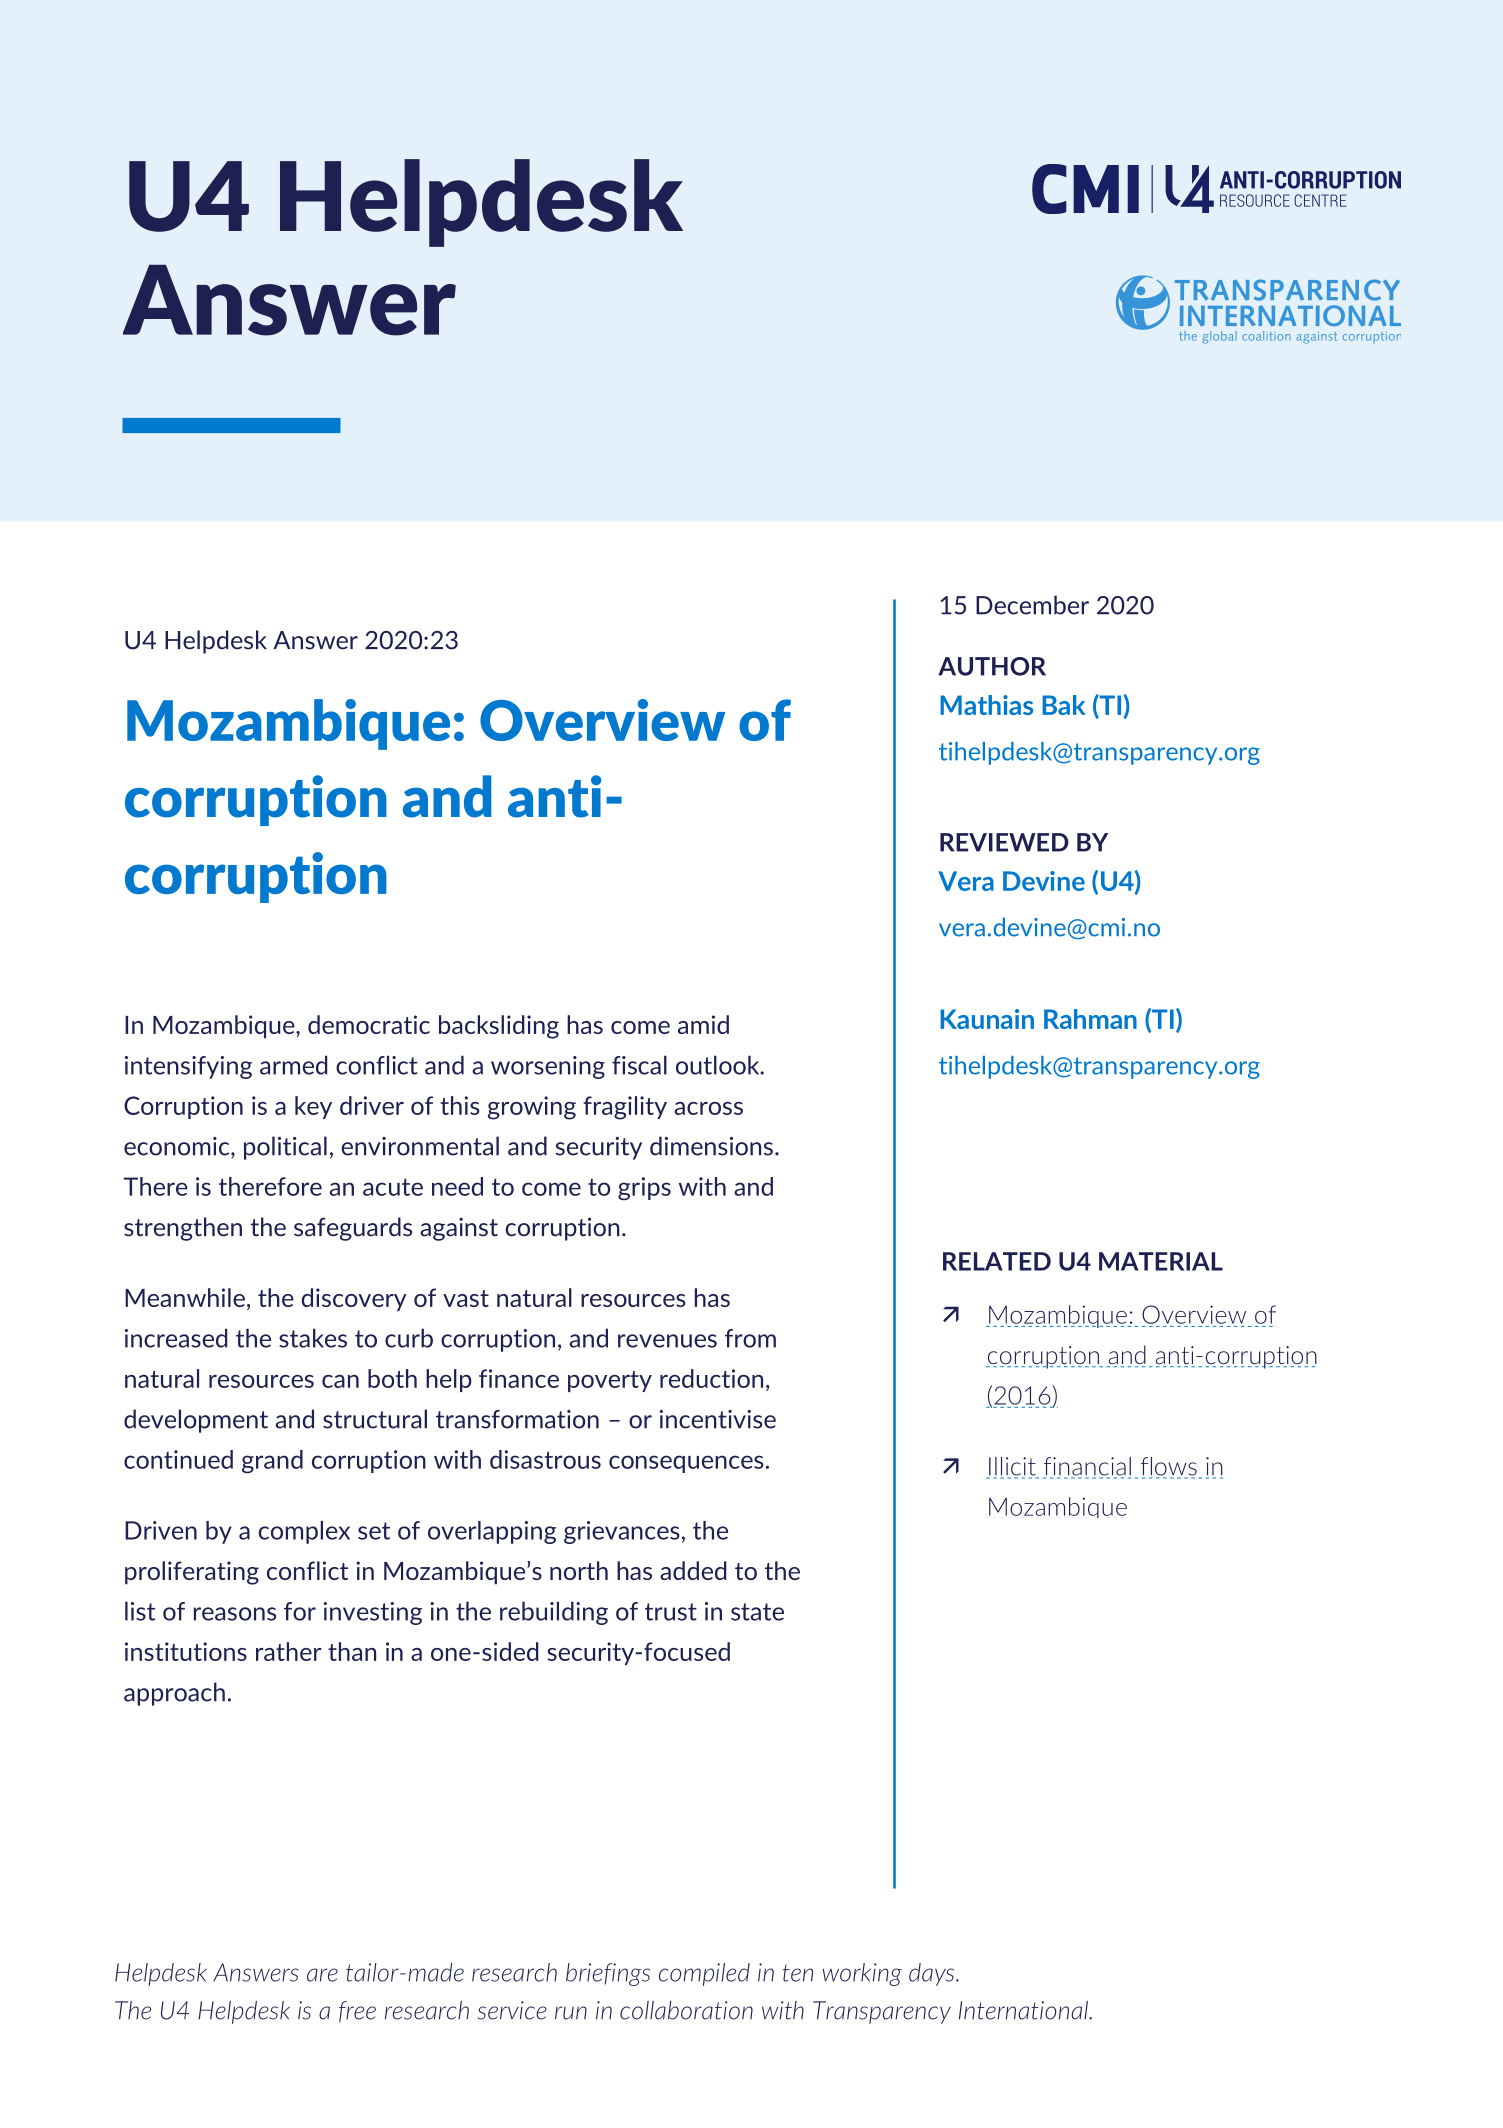 Mozambique: Overview of corruption and anti-corruption